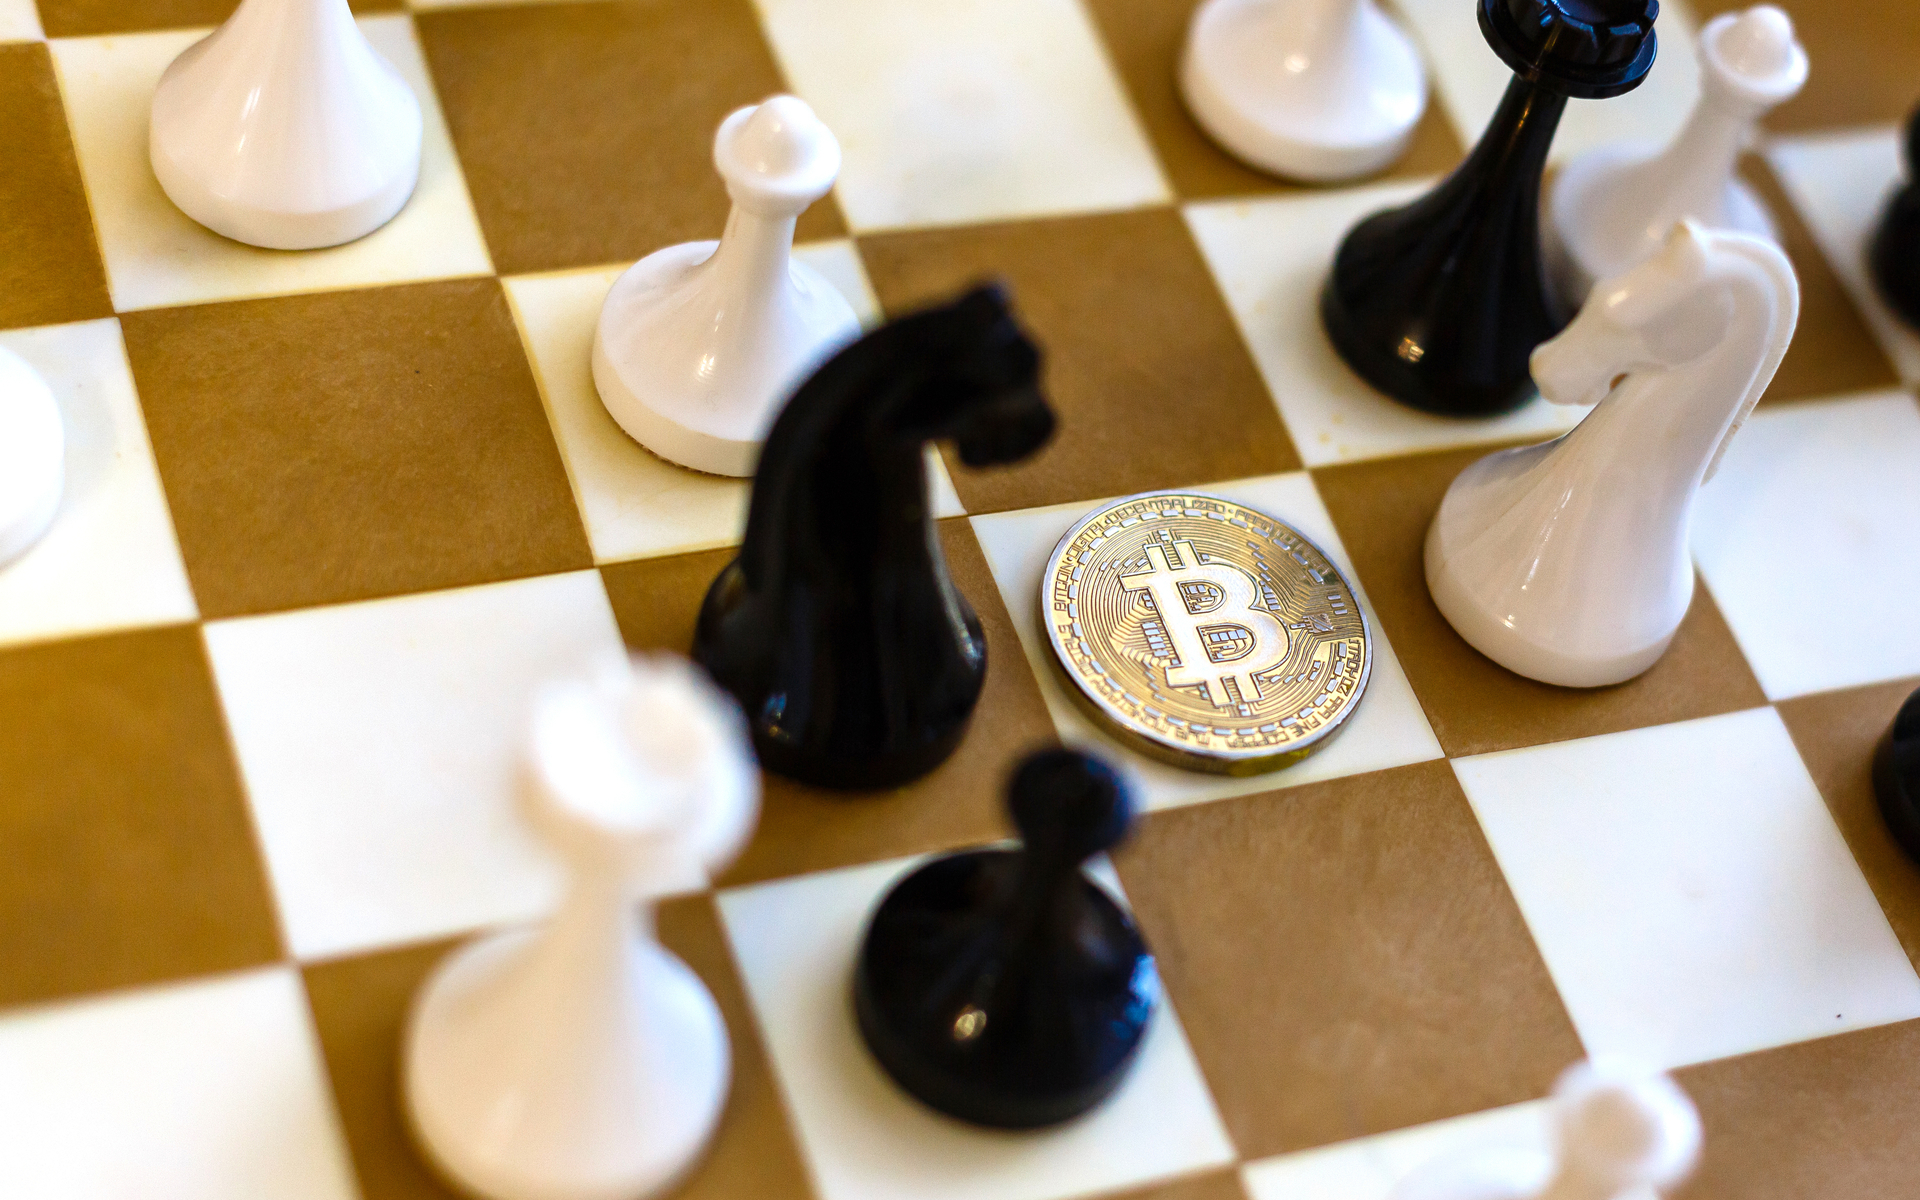 Bitcoin Market Dominance is Actually Over 80%, New Research Finds